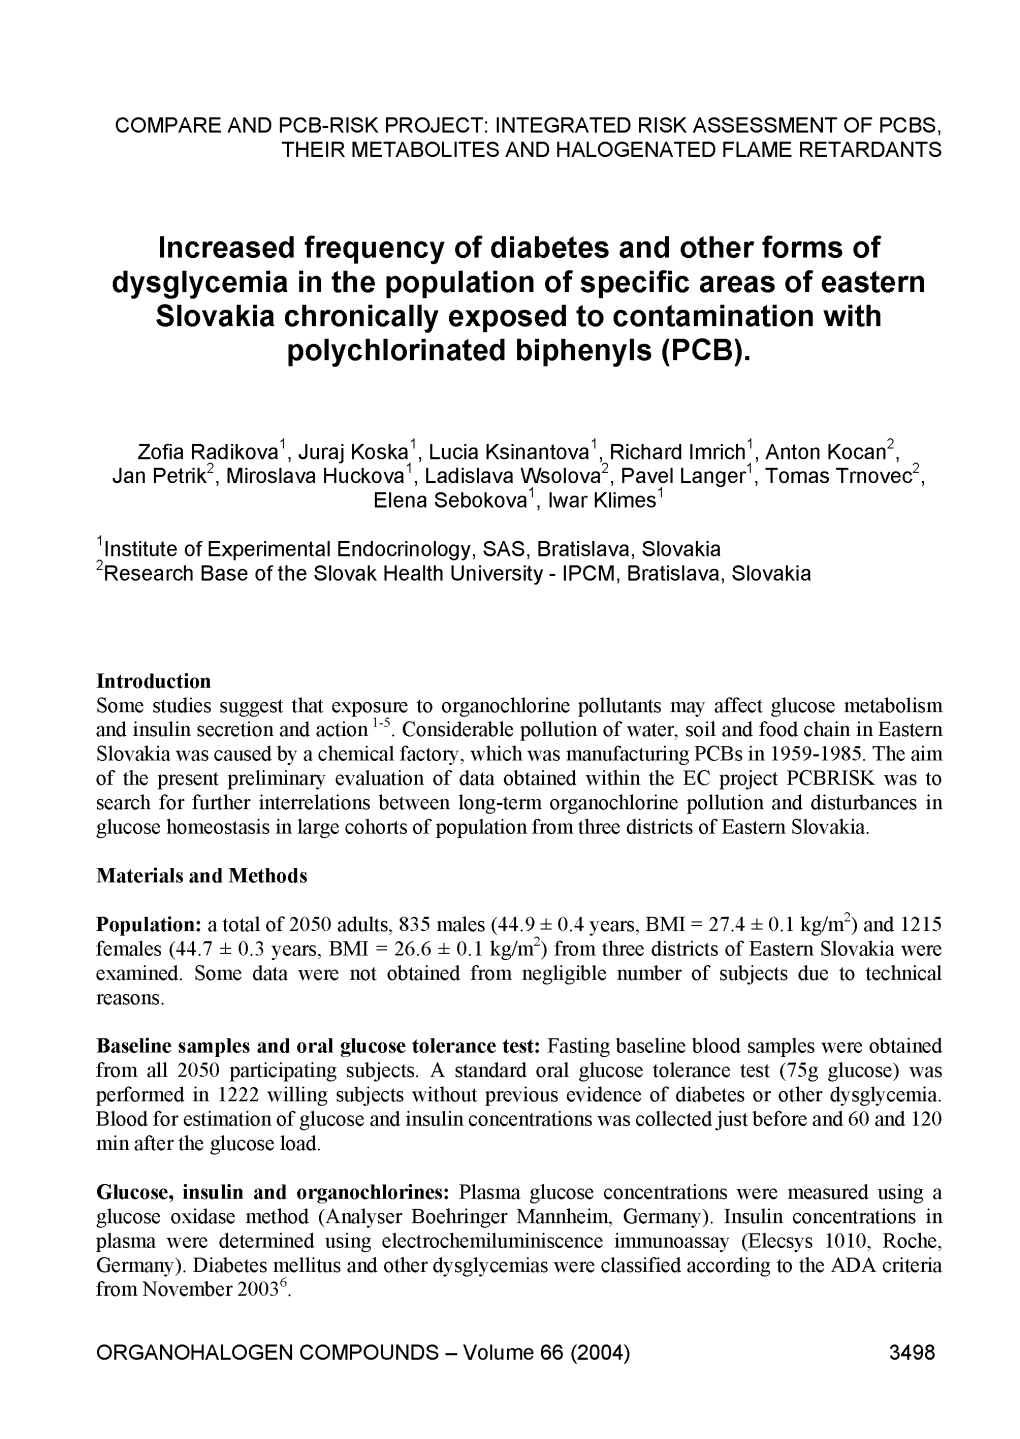 Increased Frequency of Diabetes and Other Forms of Dysglycemia in The